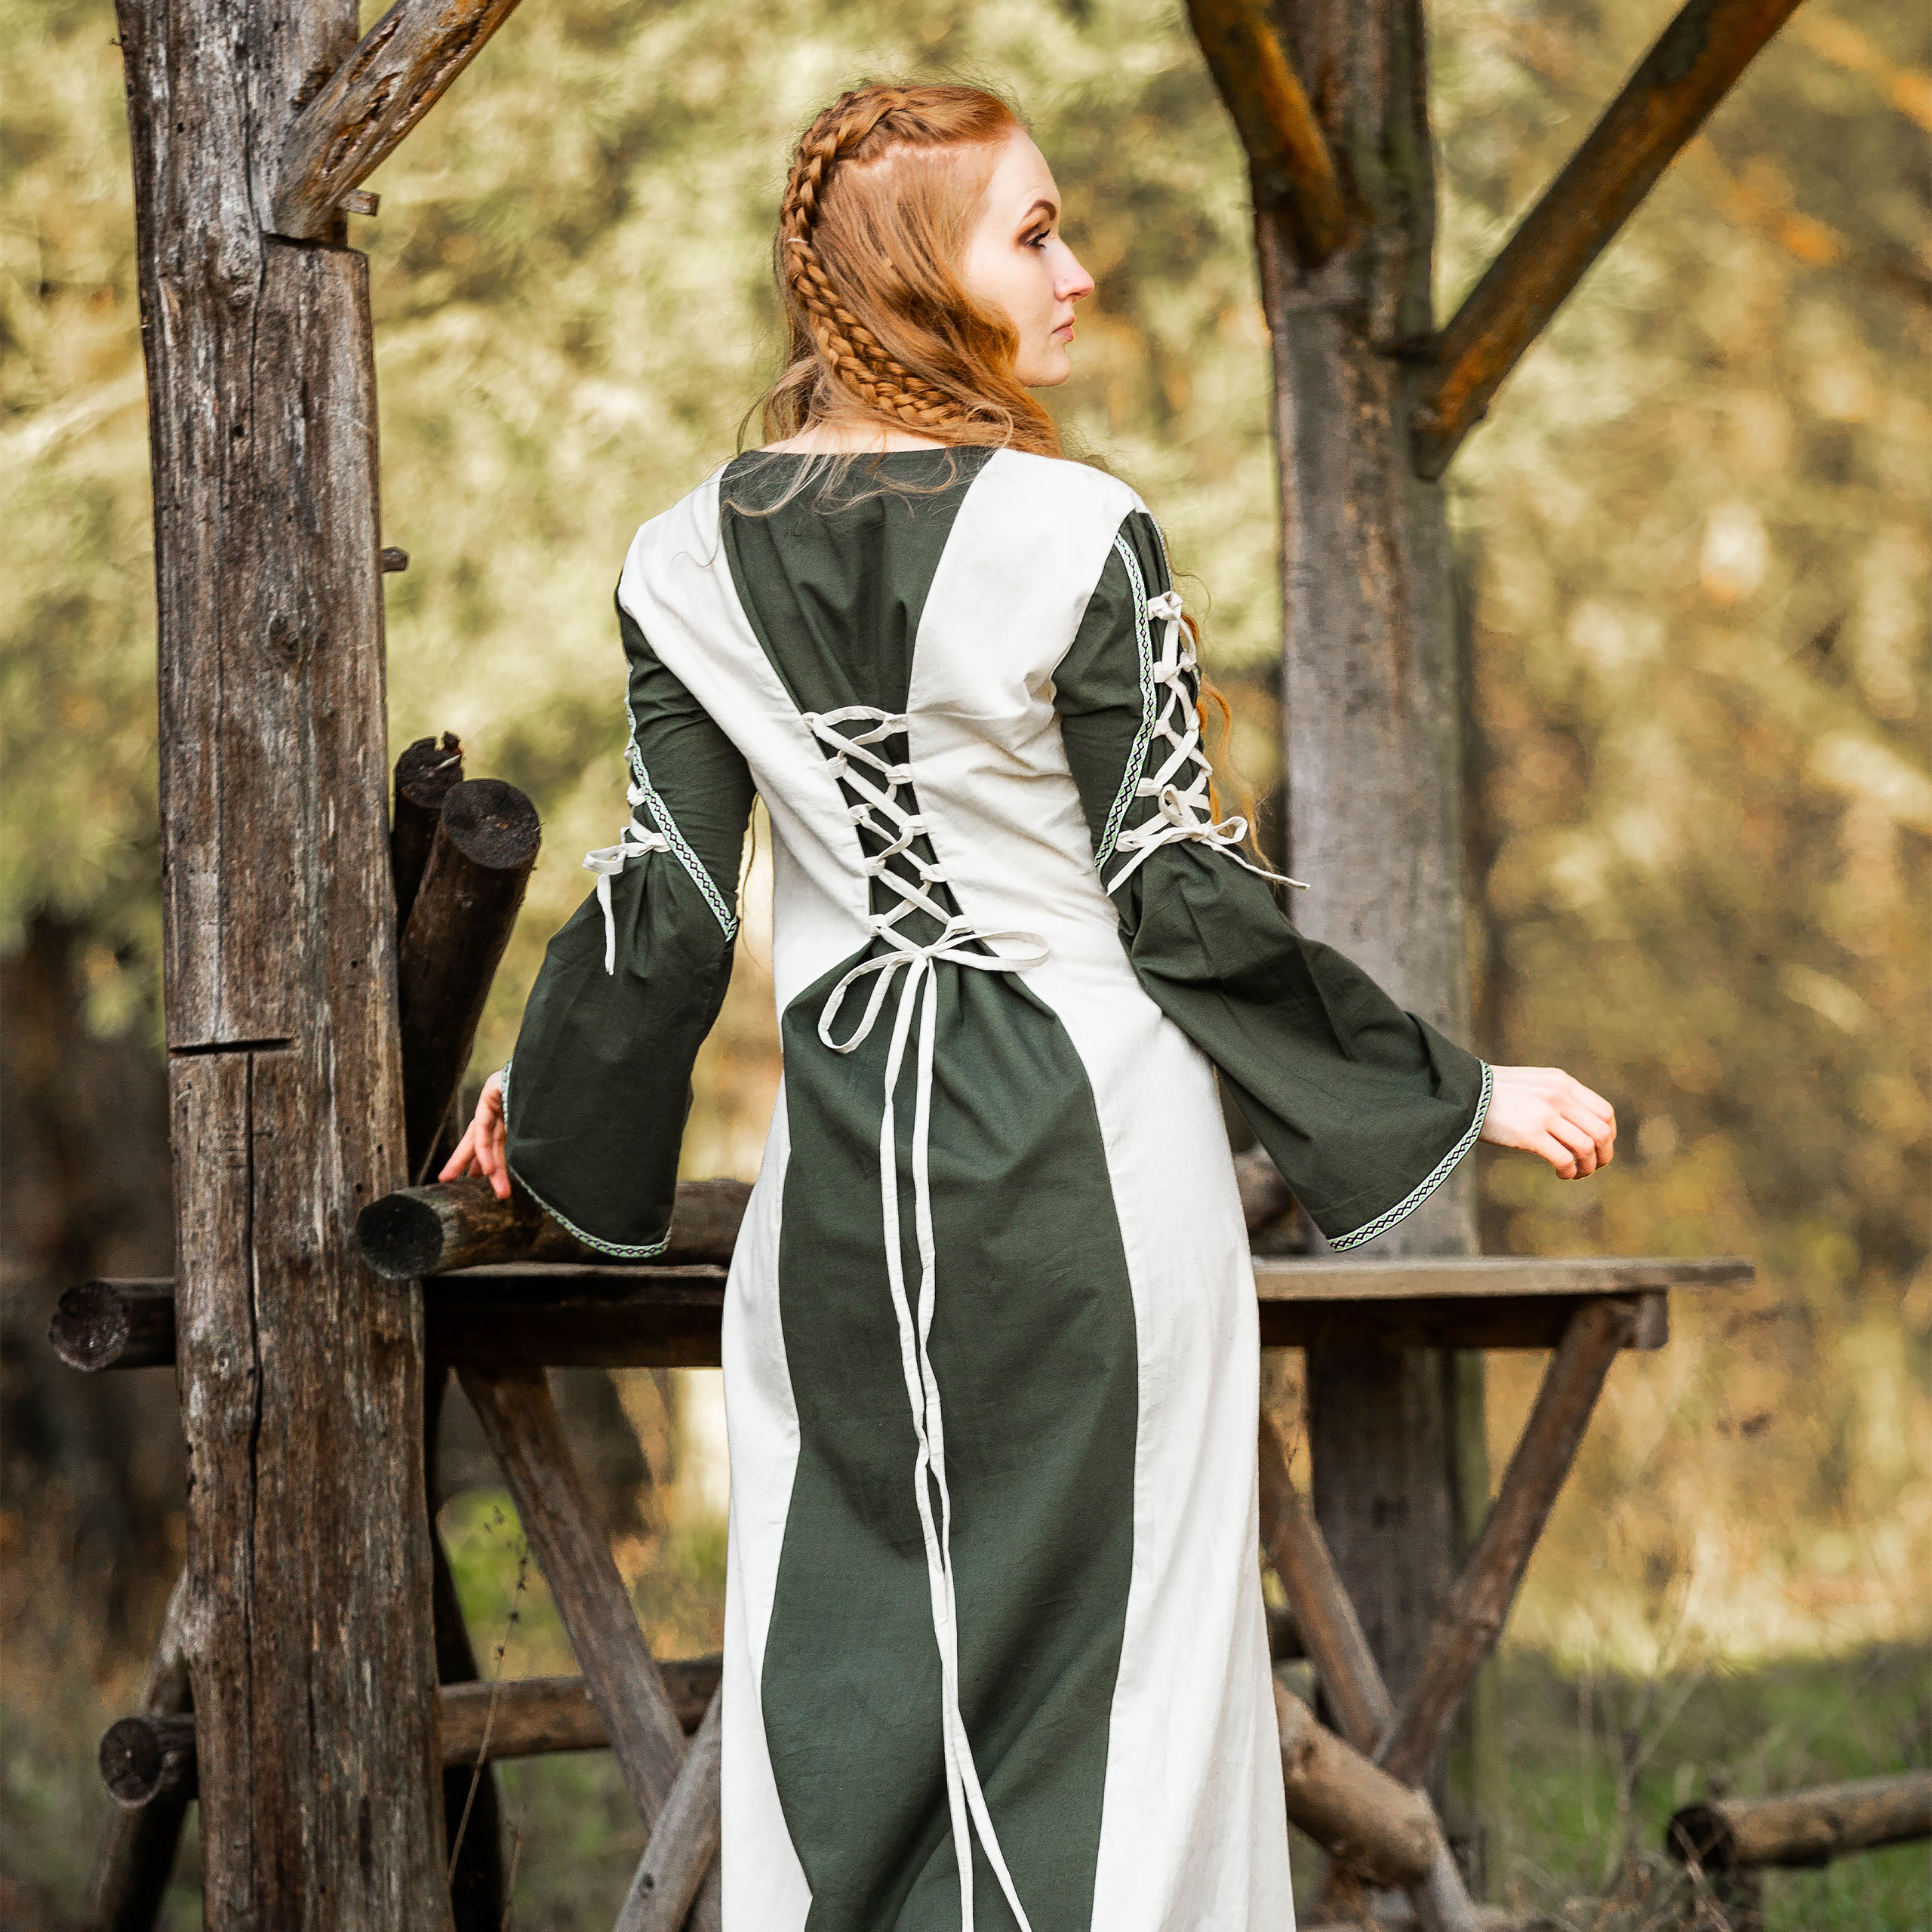 Medieval dress with lacing green-nature